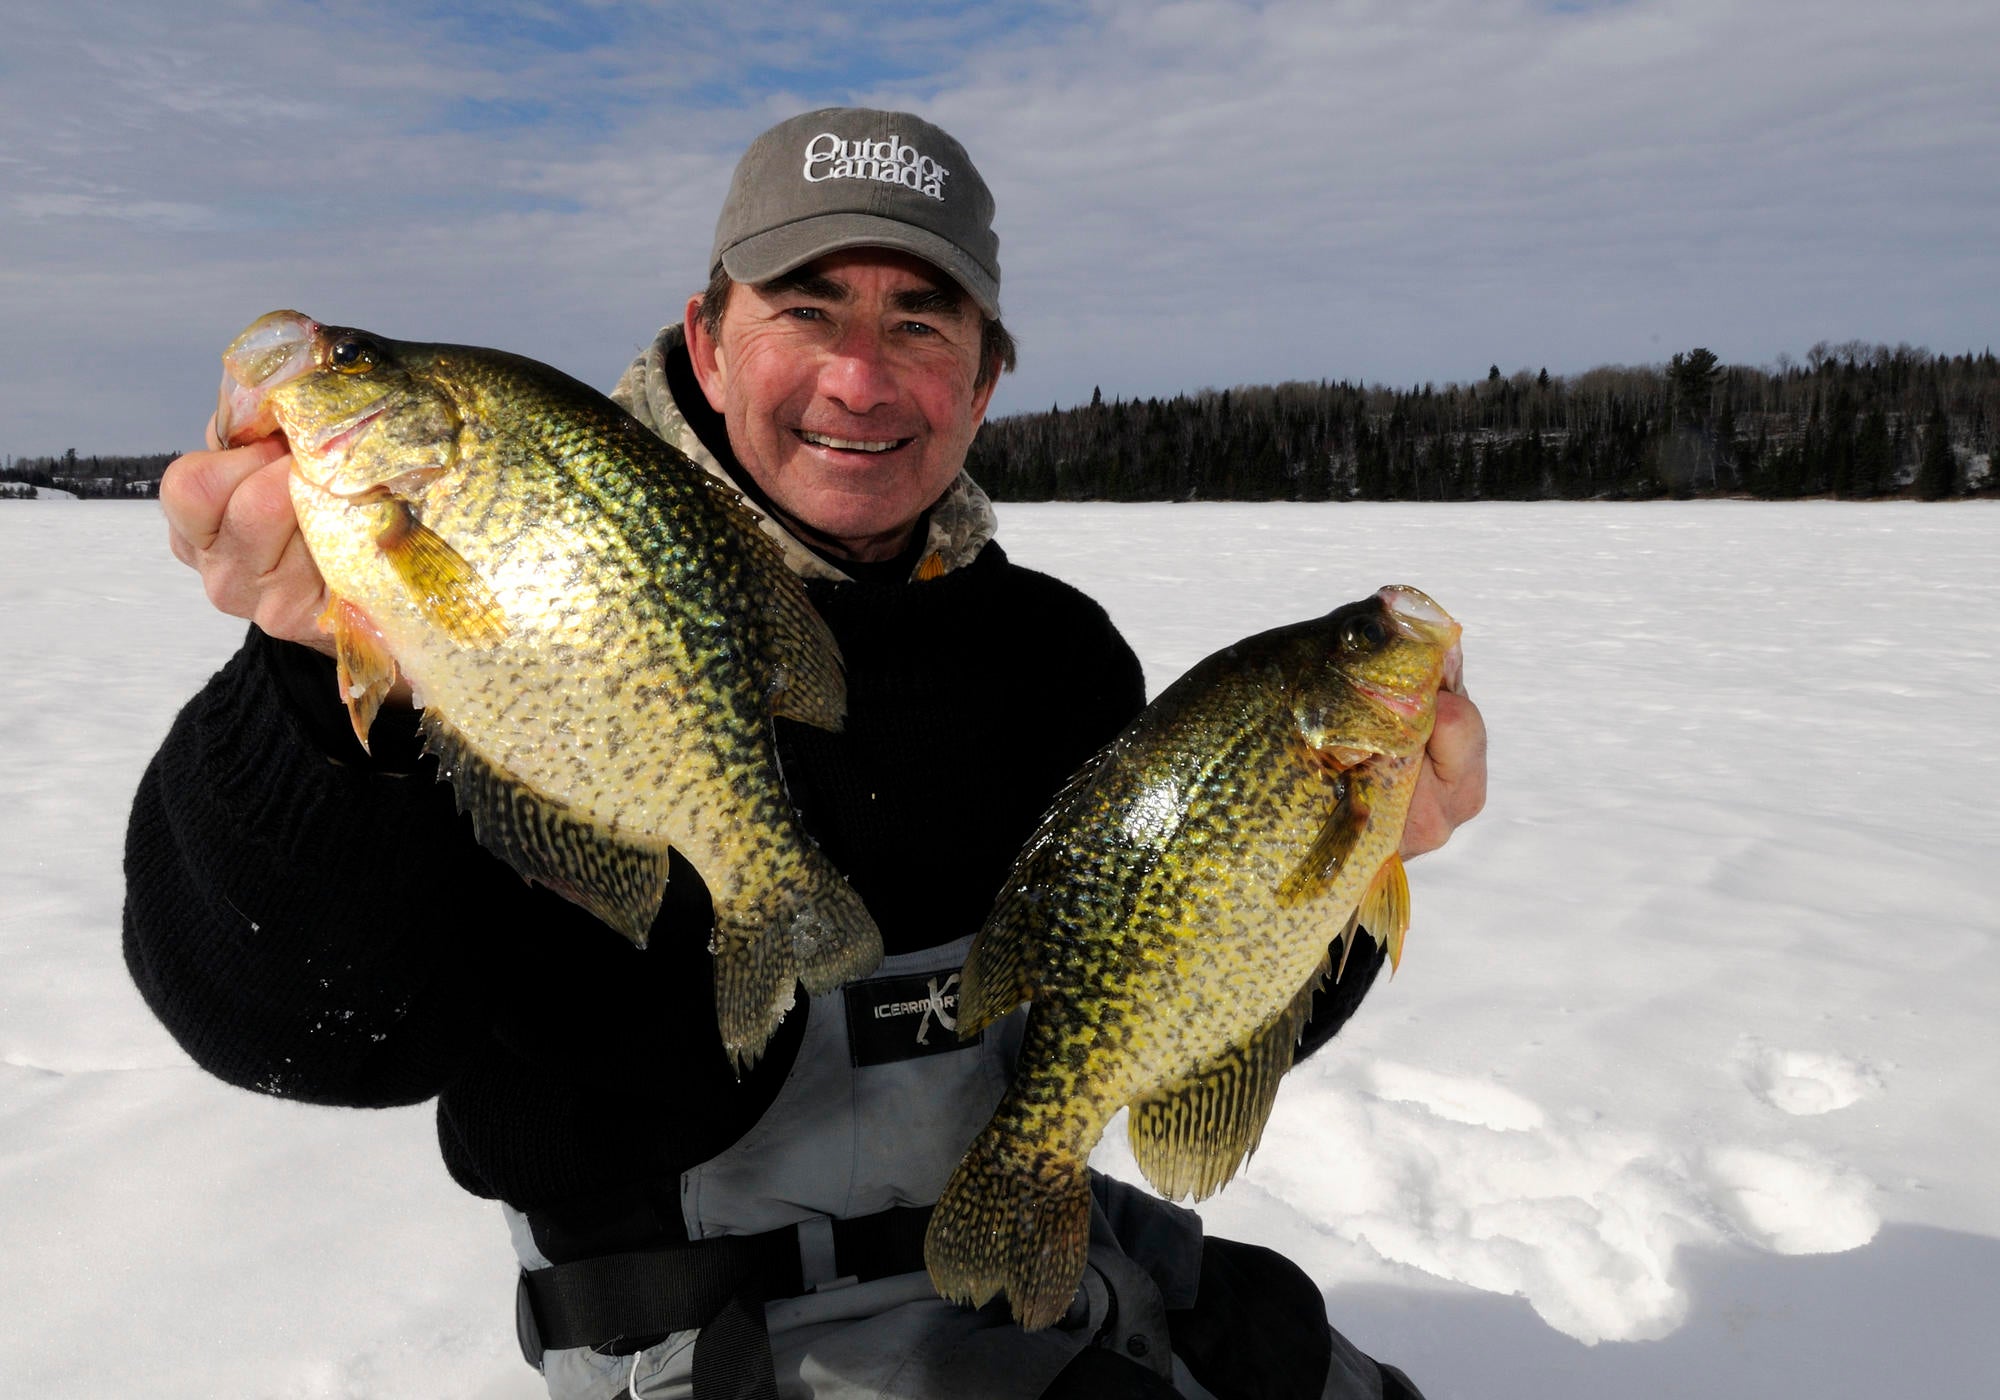 Lure color is important for catching area crappies